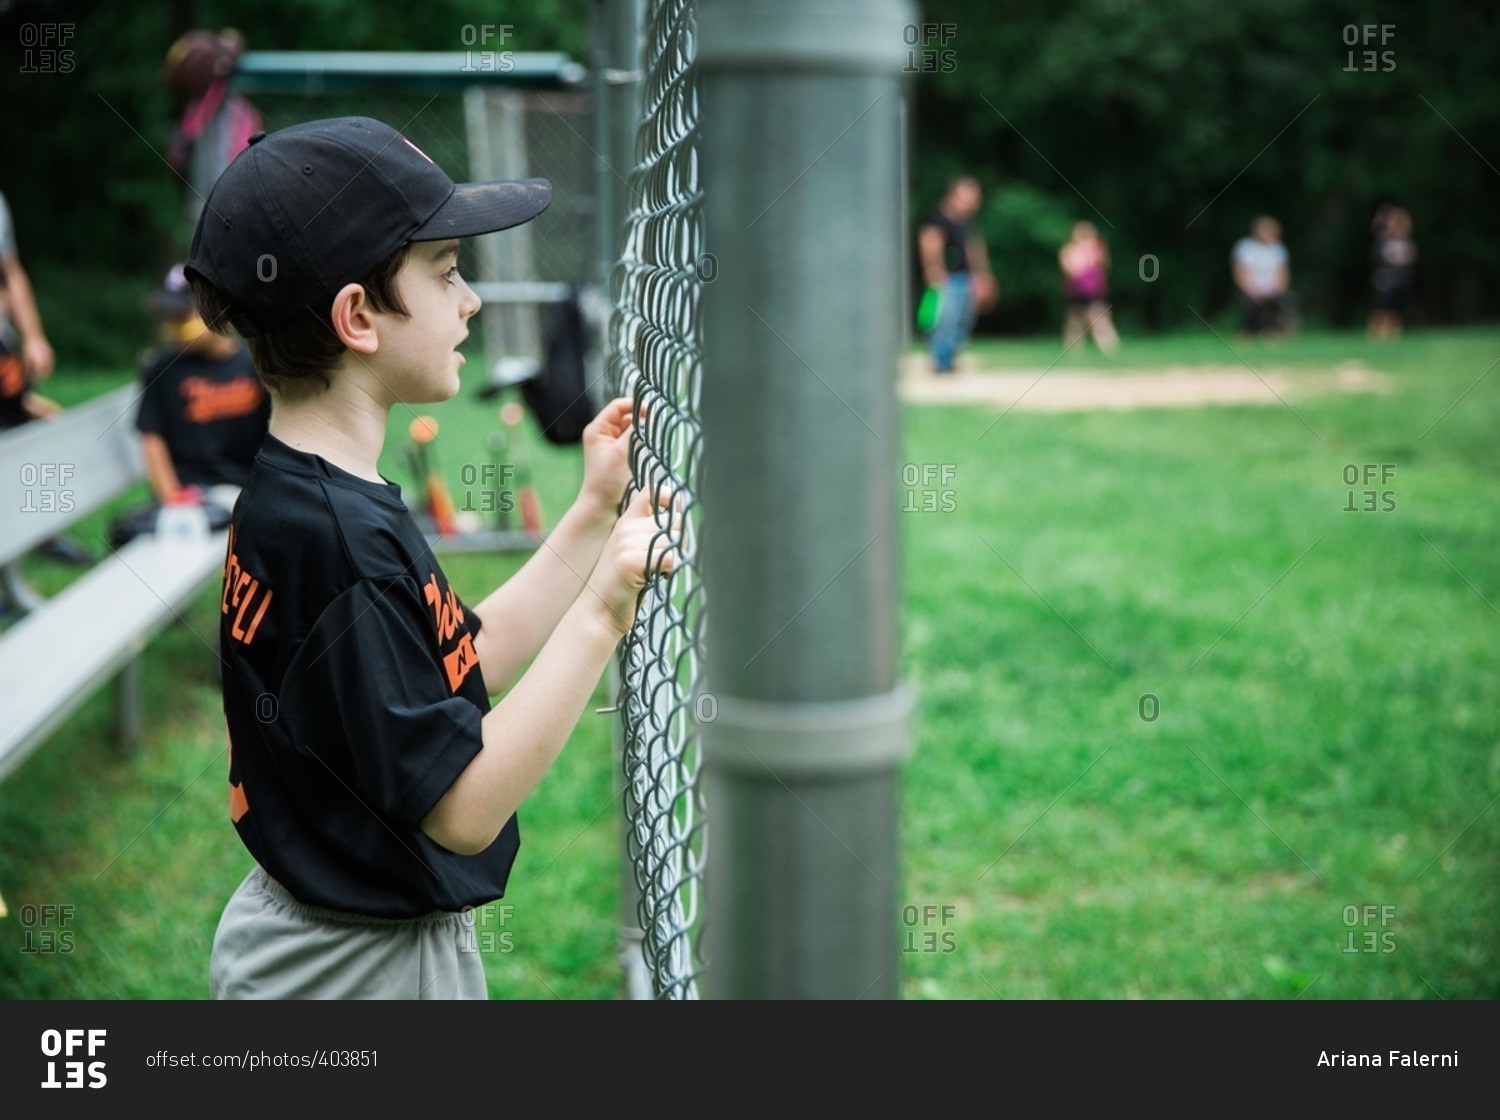 Boy watching baseball game through a chain-link fence